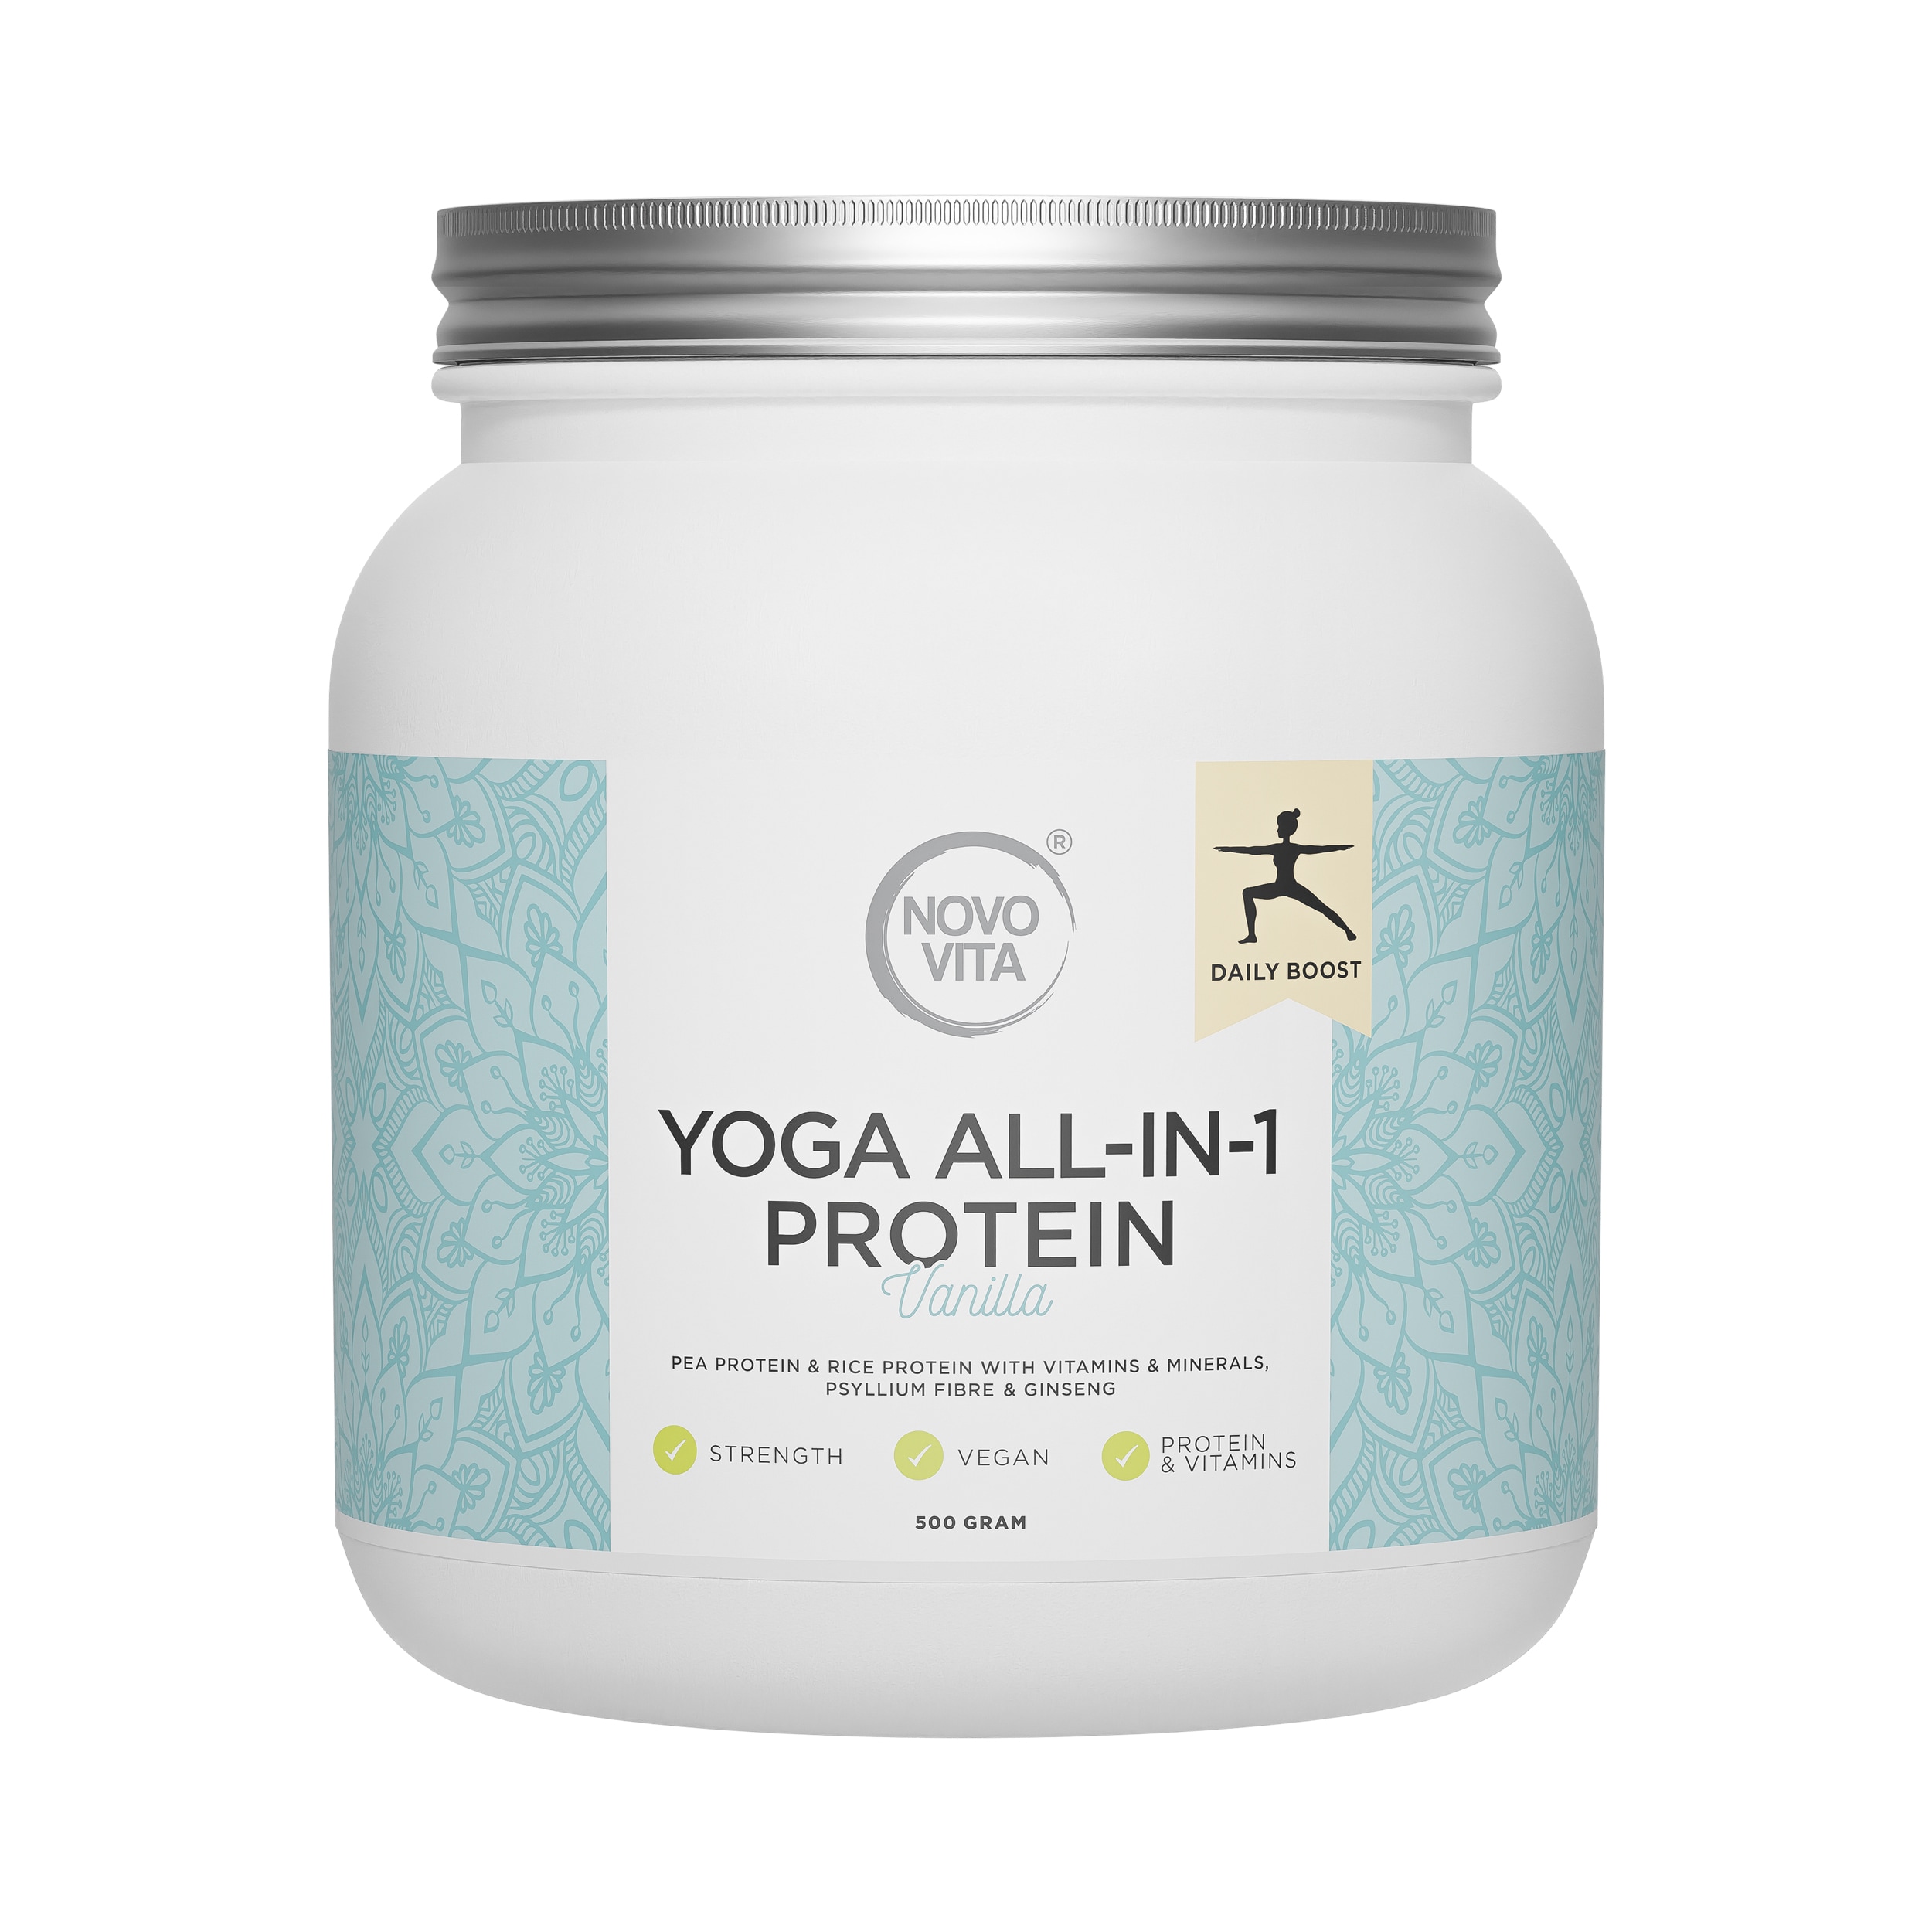 Yoga All-in-1 Protein, 500 g